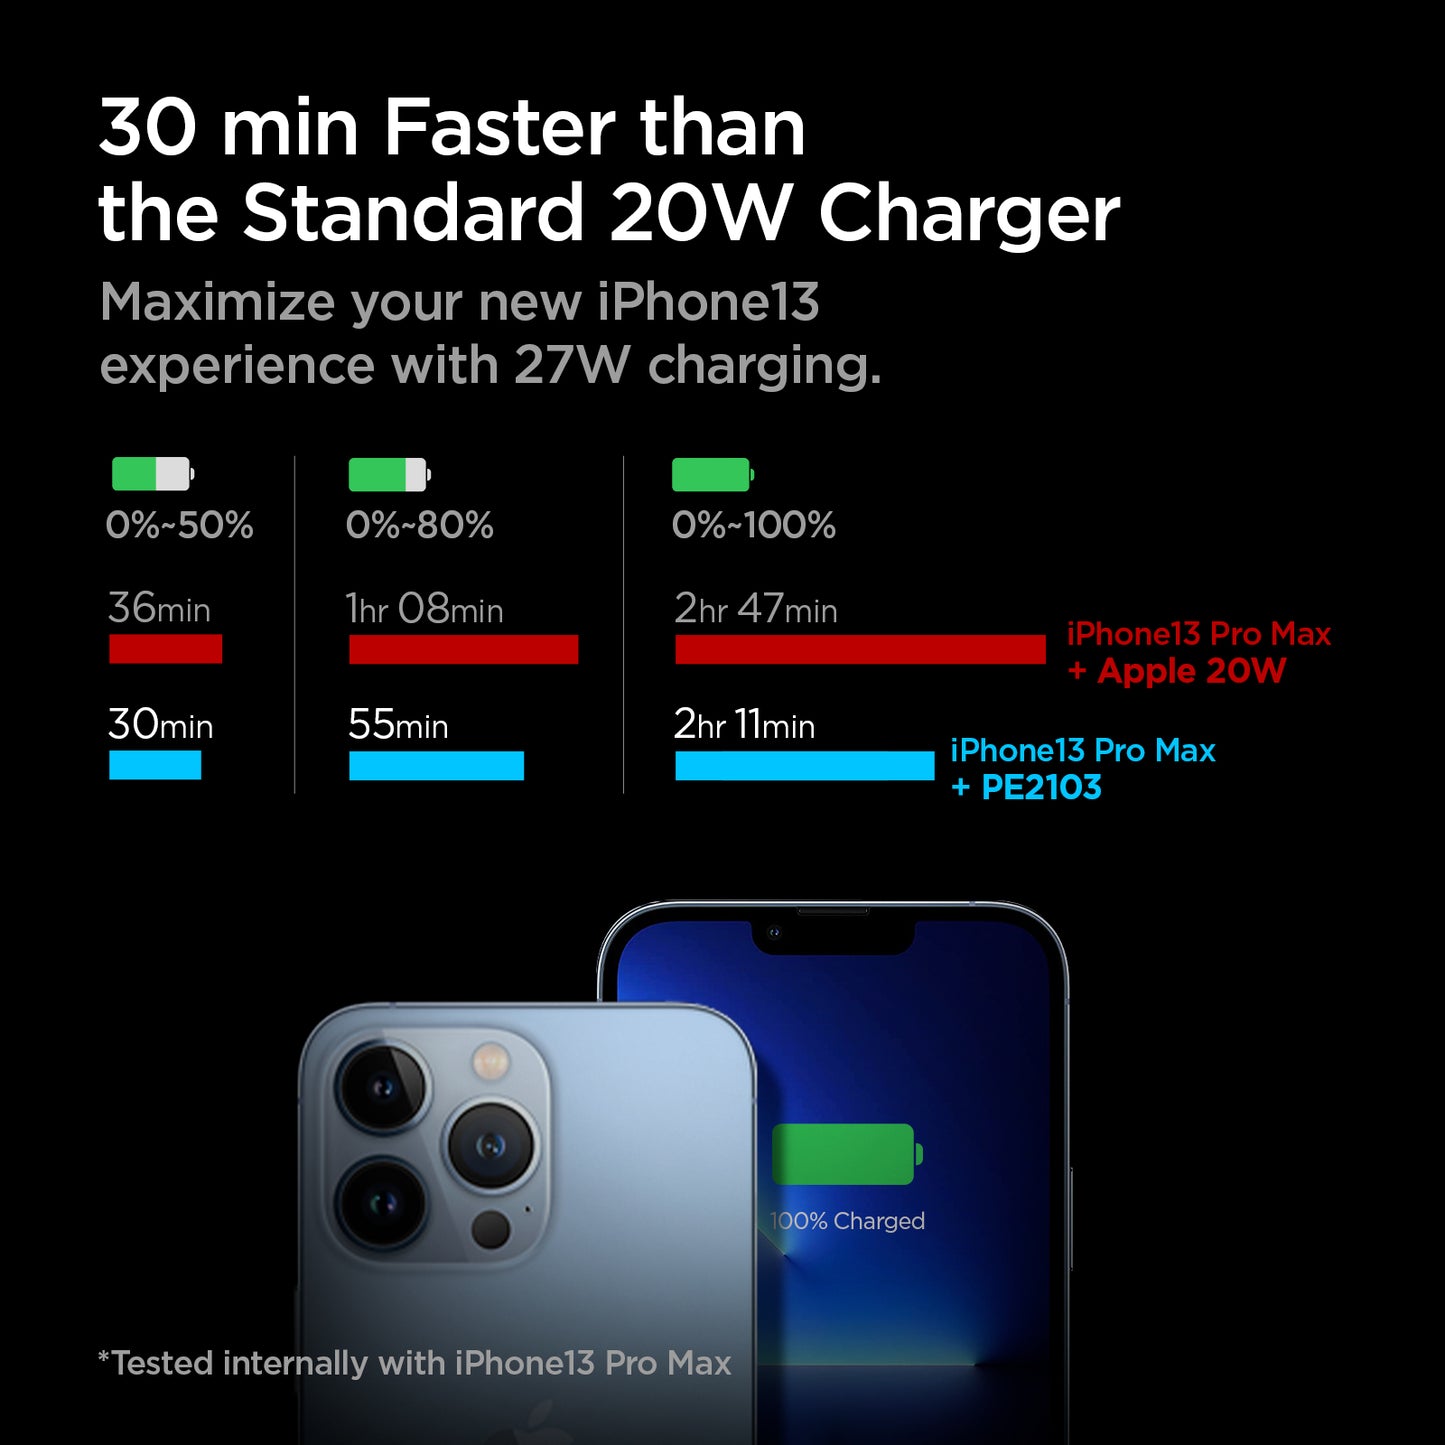 ACH03825 - ArcStation™ Pro 27W Wall Charger PE2103 in White showing the 30 min Faster than the Standard 20W Charger. Maximizing the new iPhone13 with 27W charging. Comparison of charging percentage between iPhone 13 Pro Max + Apple 20W and iPhone 13 Pro Max + PE2103